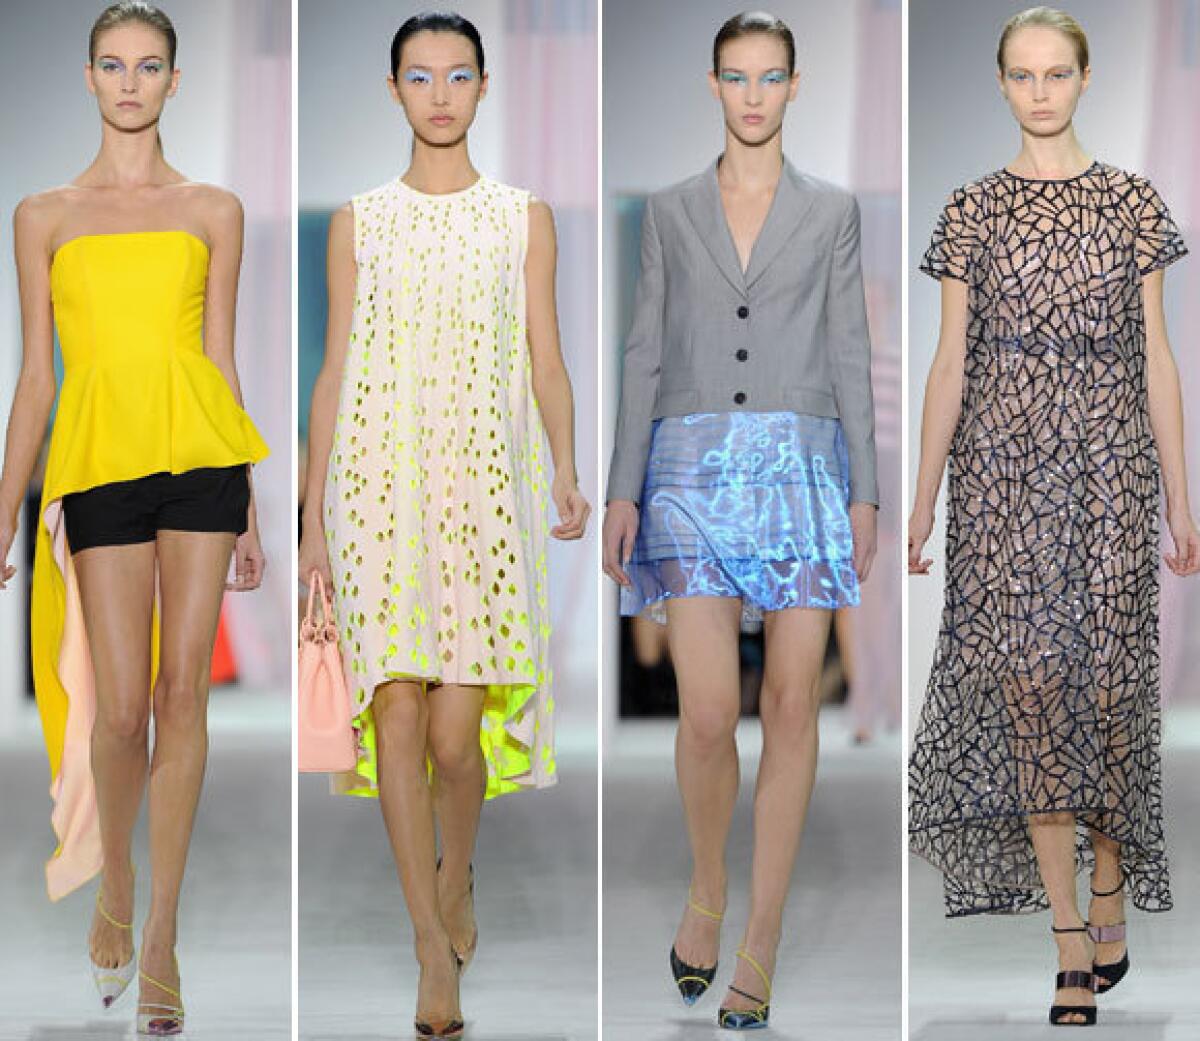 Looks from the Dior spring-summer 2013 runway collection shown during Paris Fashion Week.